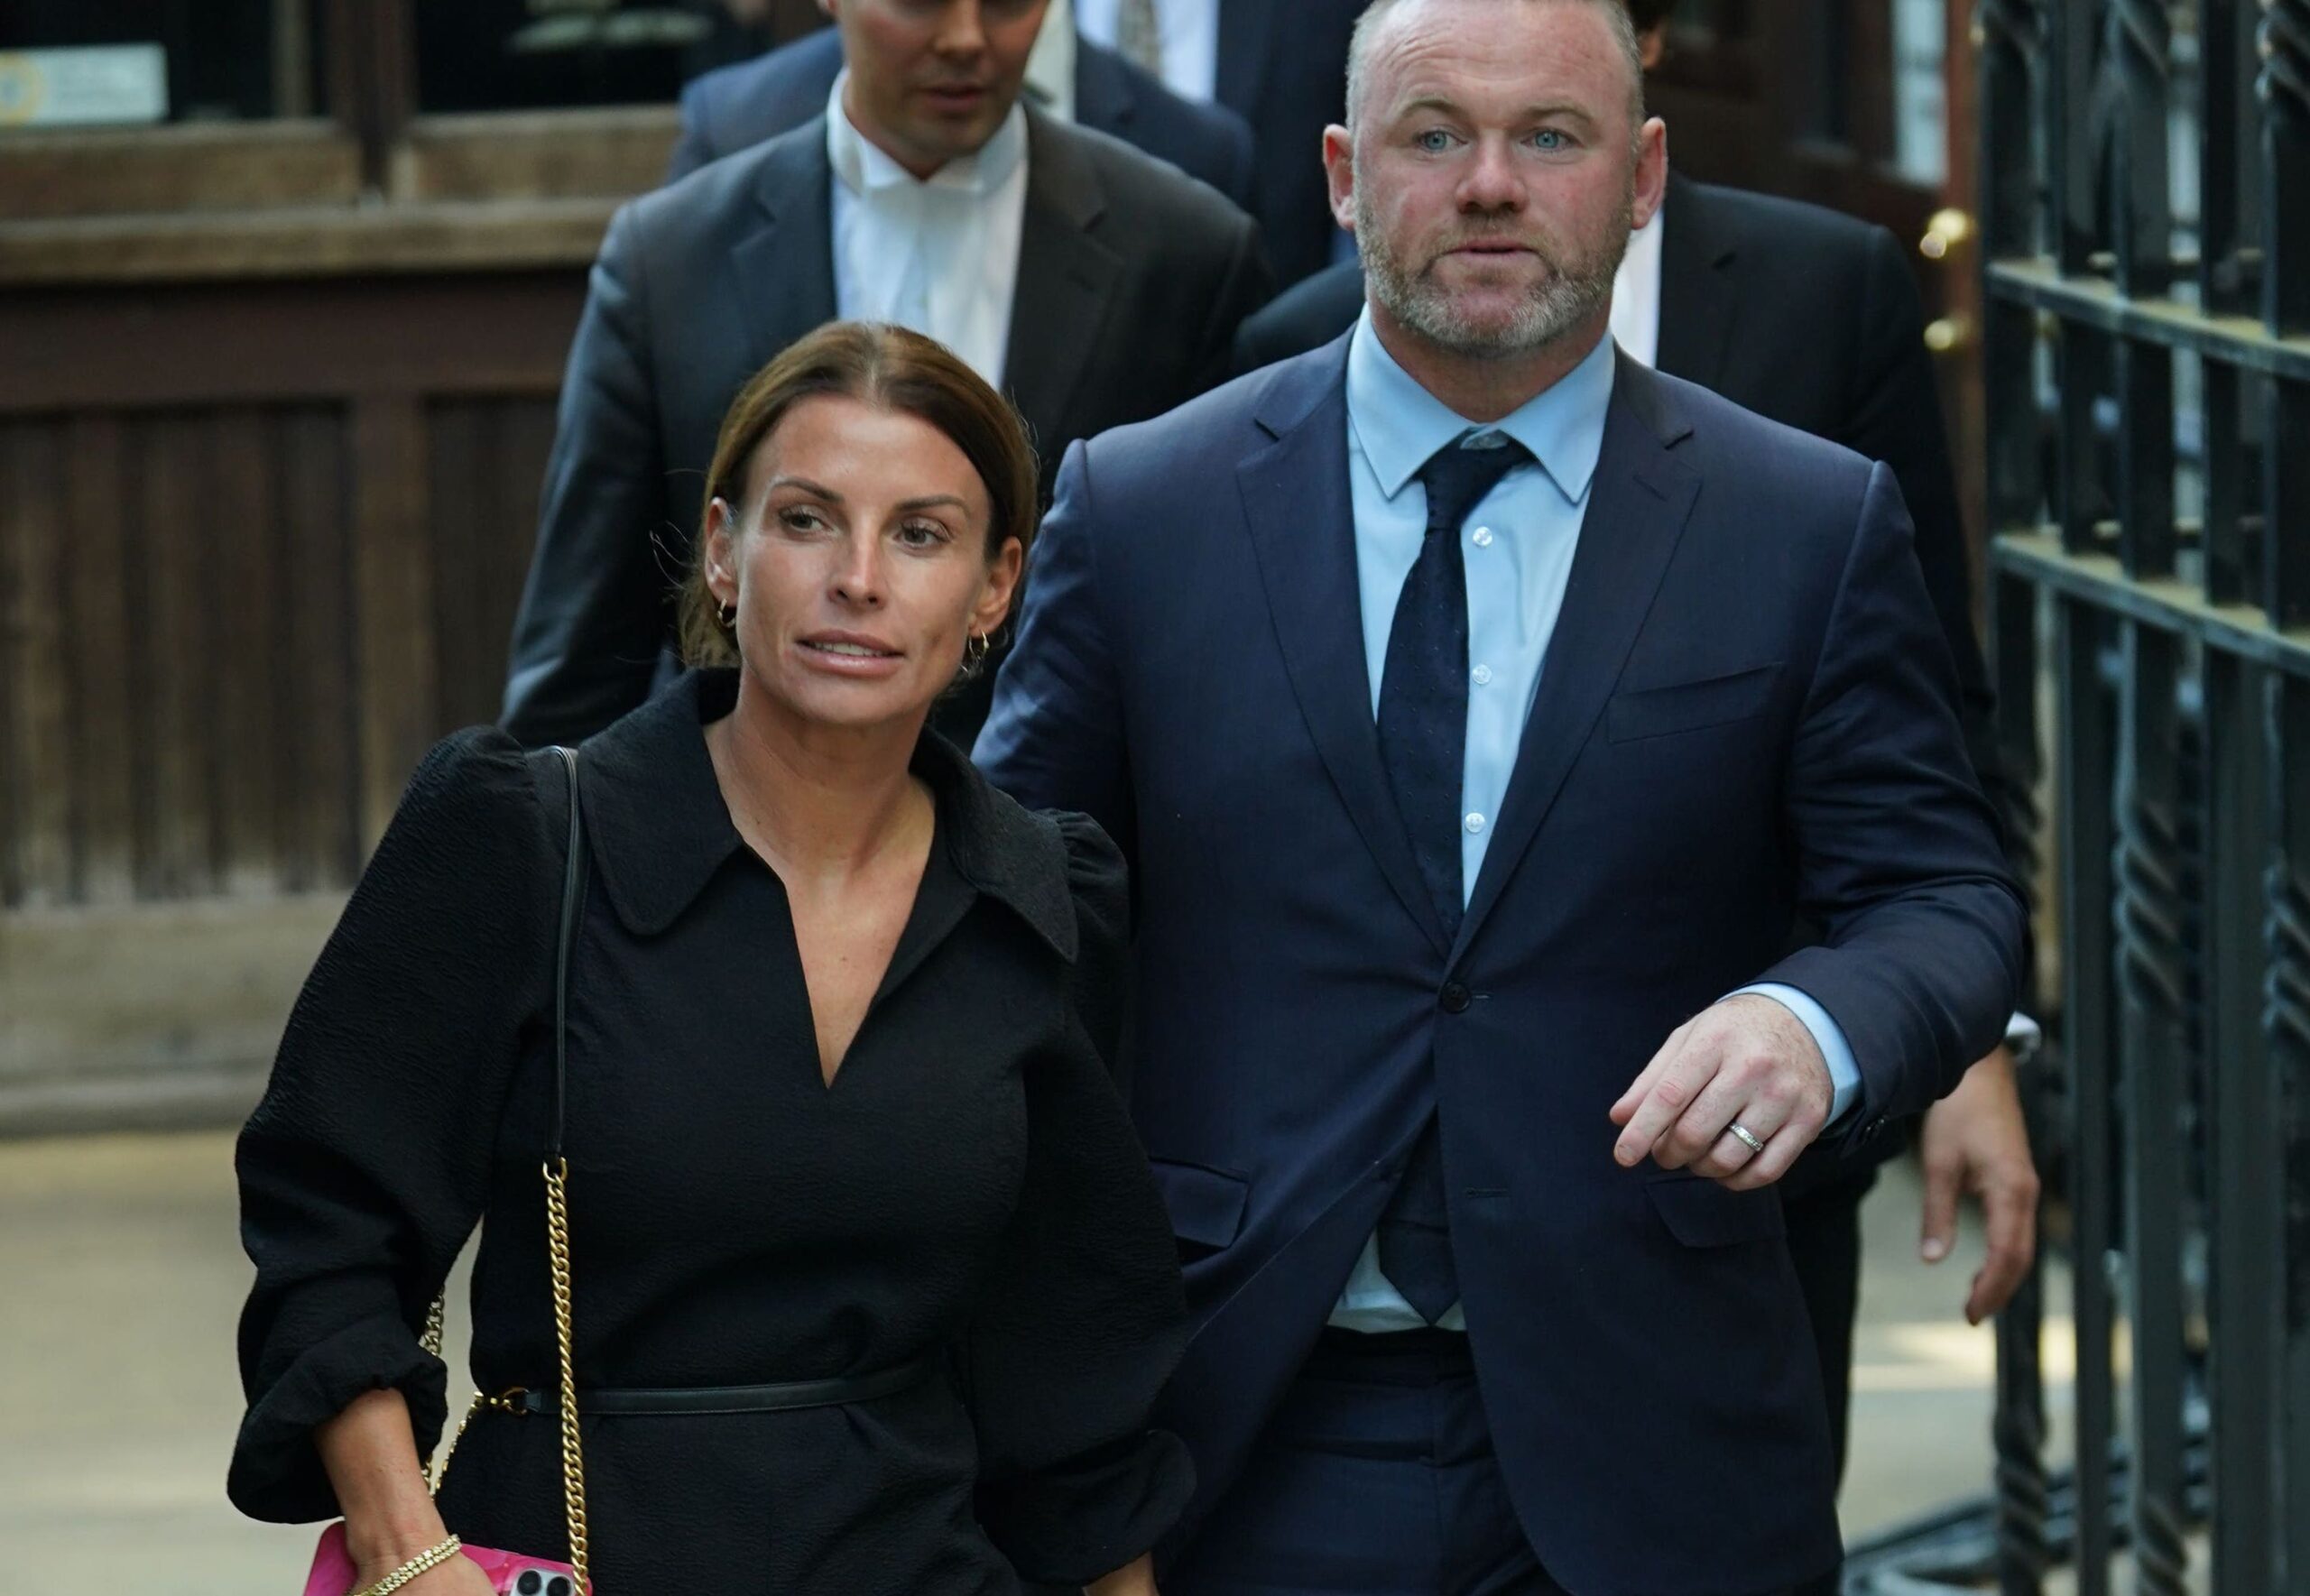 Coleen Rooney speaks out about her relationship with Rebekah Vardy ahead of the new Disney+ documentary